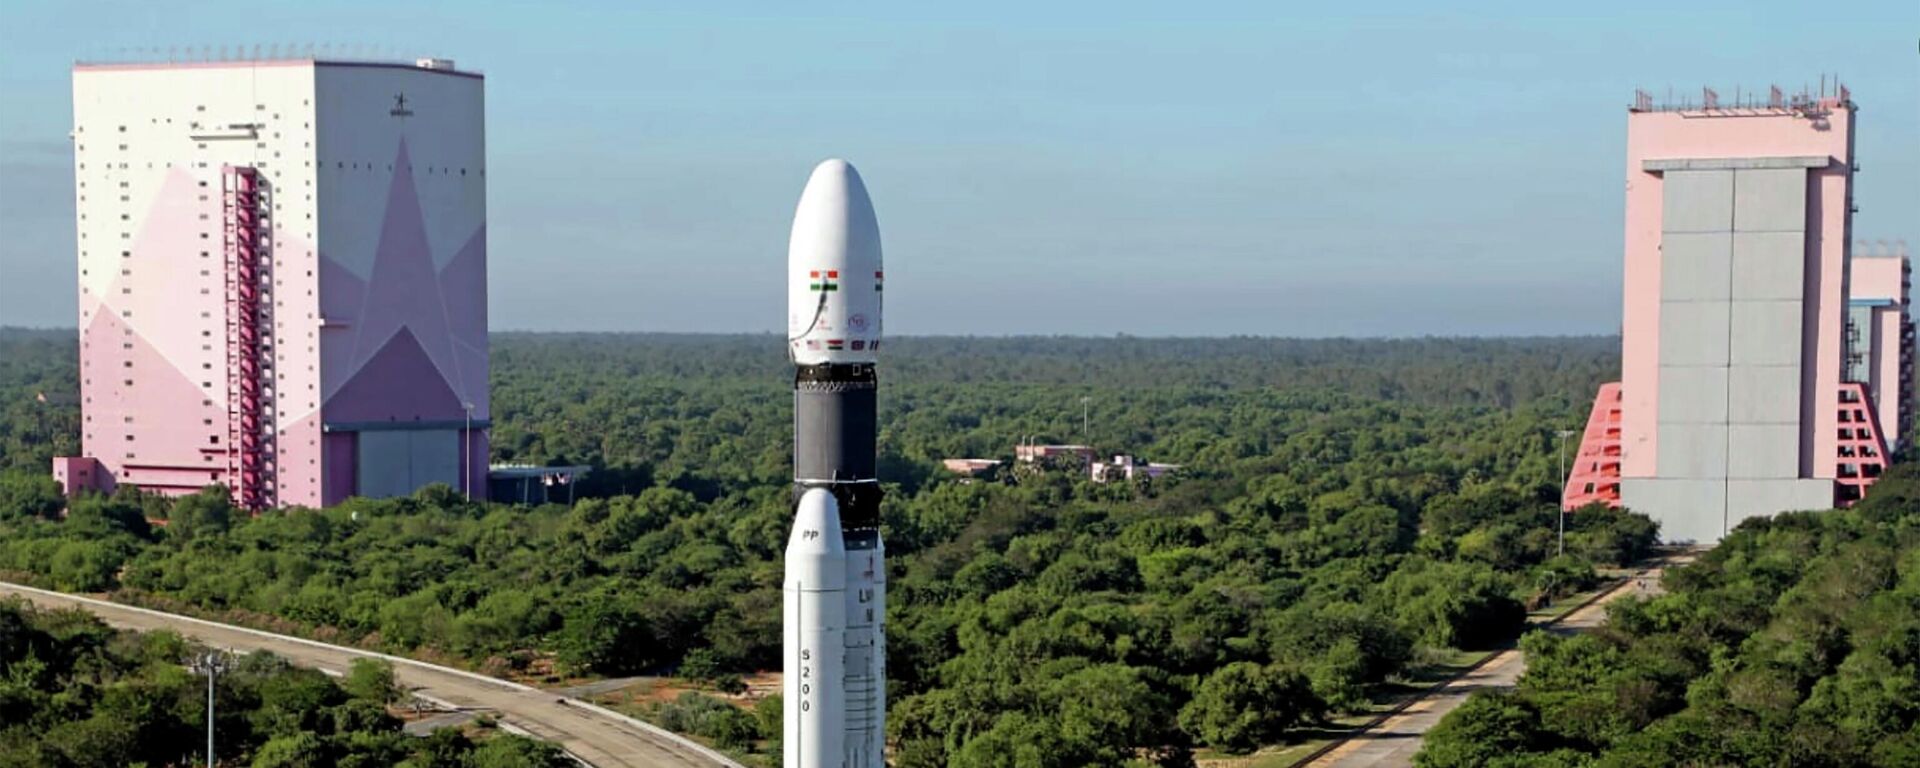 This photograph released by the Indian Space Research Organization (ISRO) shows India's heaviest rocket prepared ahead of the launch from the Satish Dhawan Space Center in Sriharikota, India, Saturday, Oct. 15, 2022.  - Sputnik International, 1920, 23.10.2022